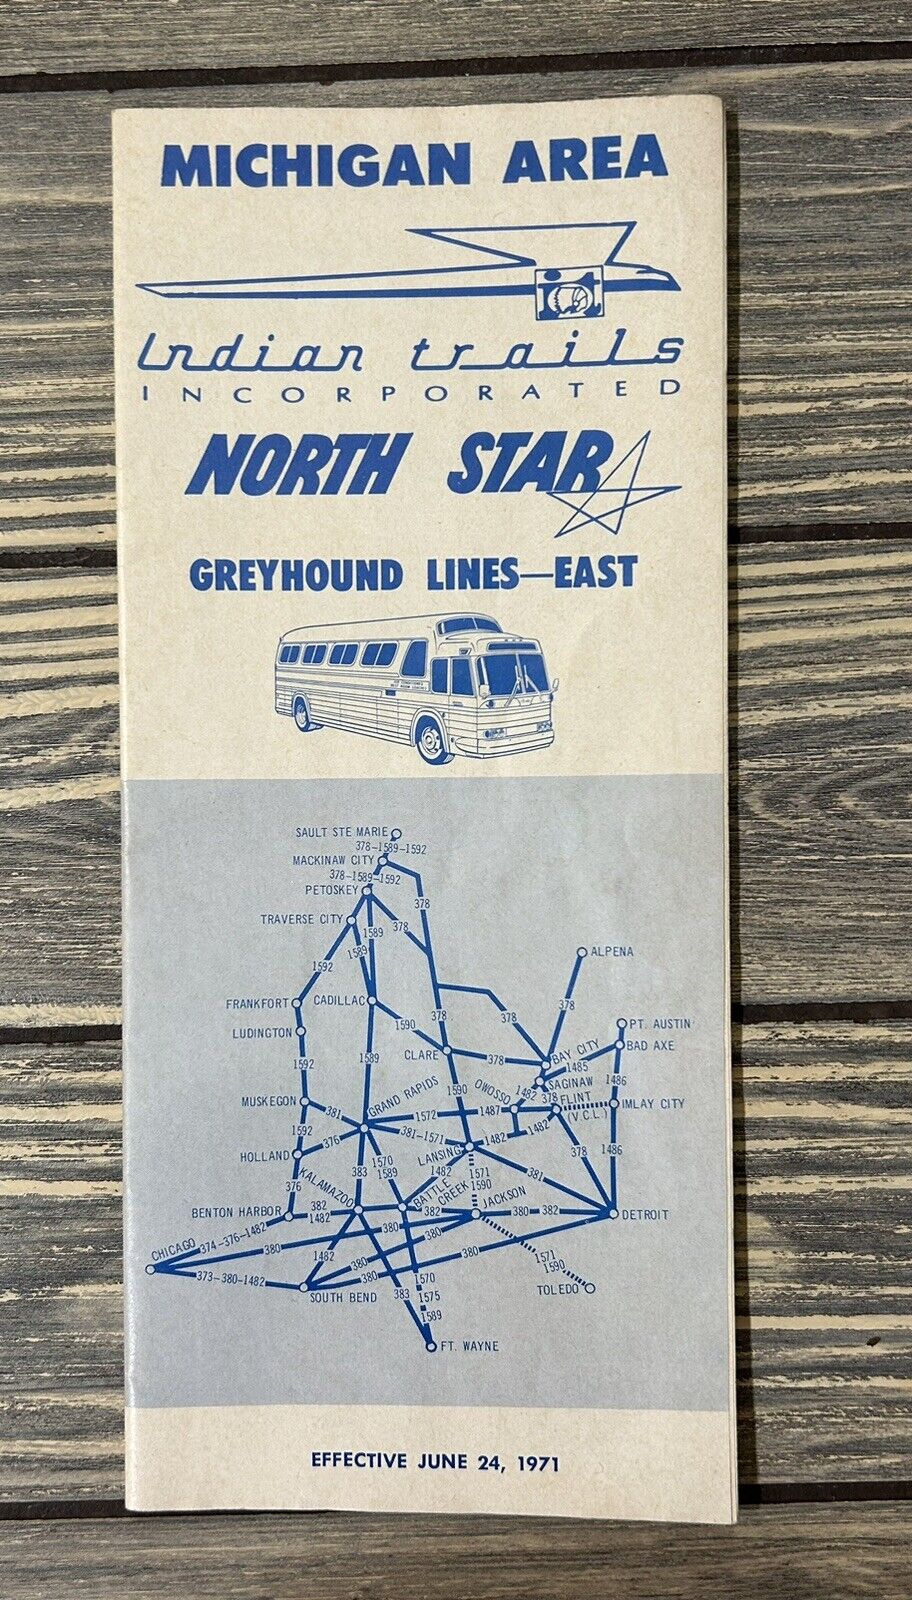 Vintage June 24 1971 Michigan Area Indian Trails Incorporated North Star